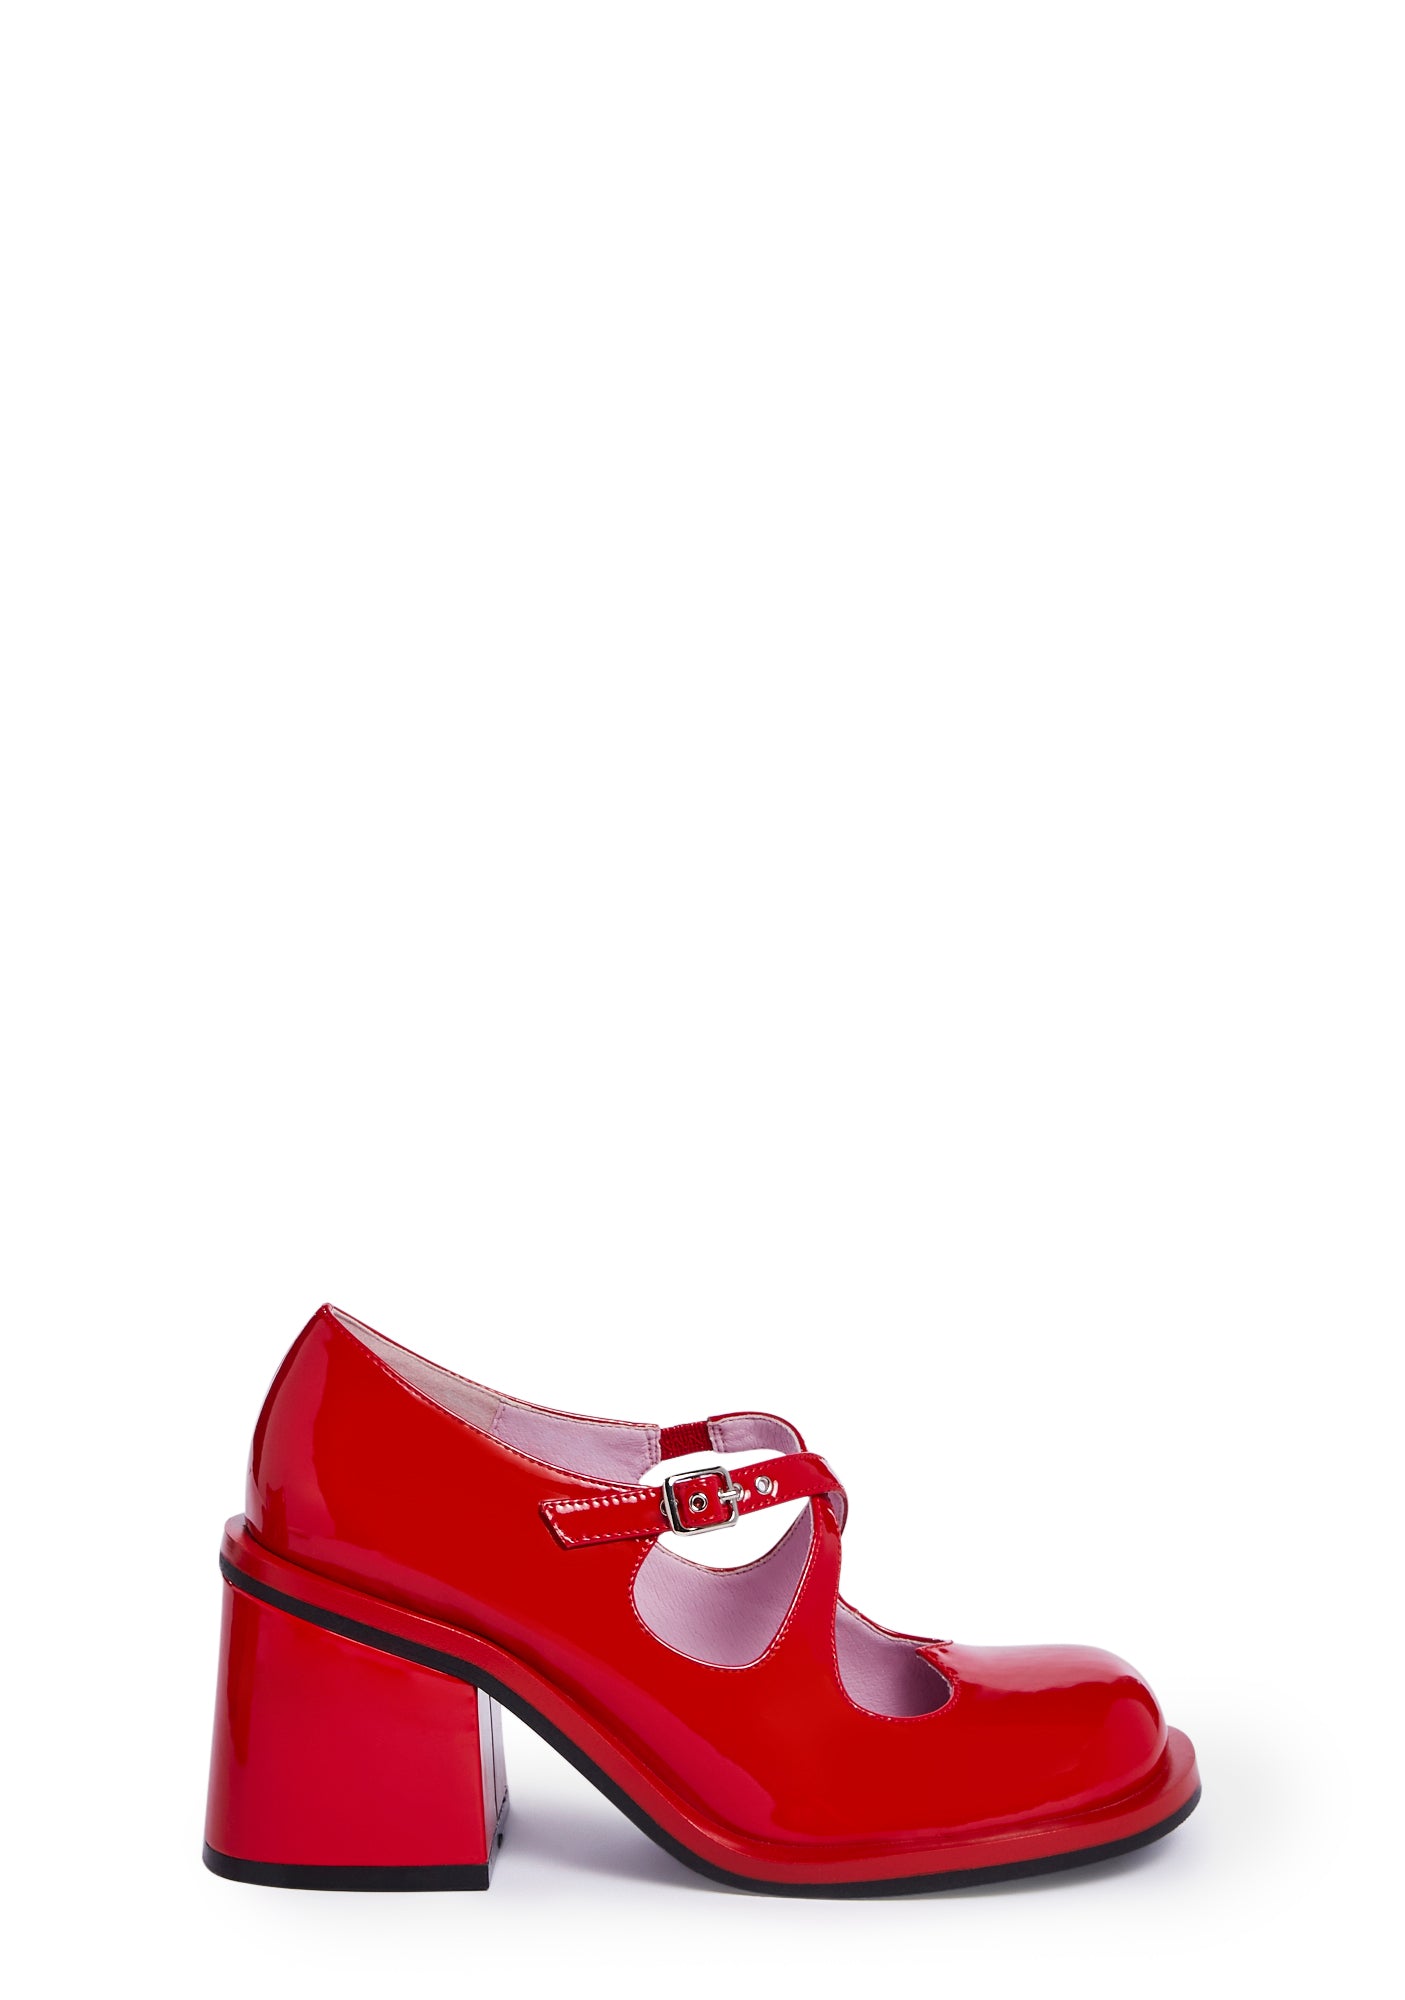 Sugar Thrillz Patent Heart Cutout Mary Janes - Red